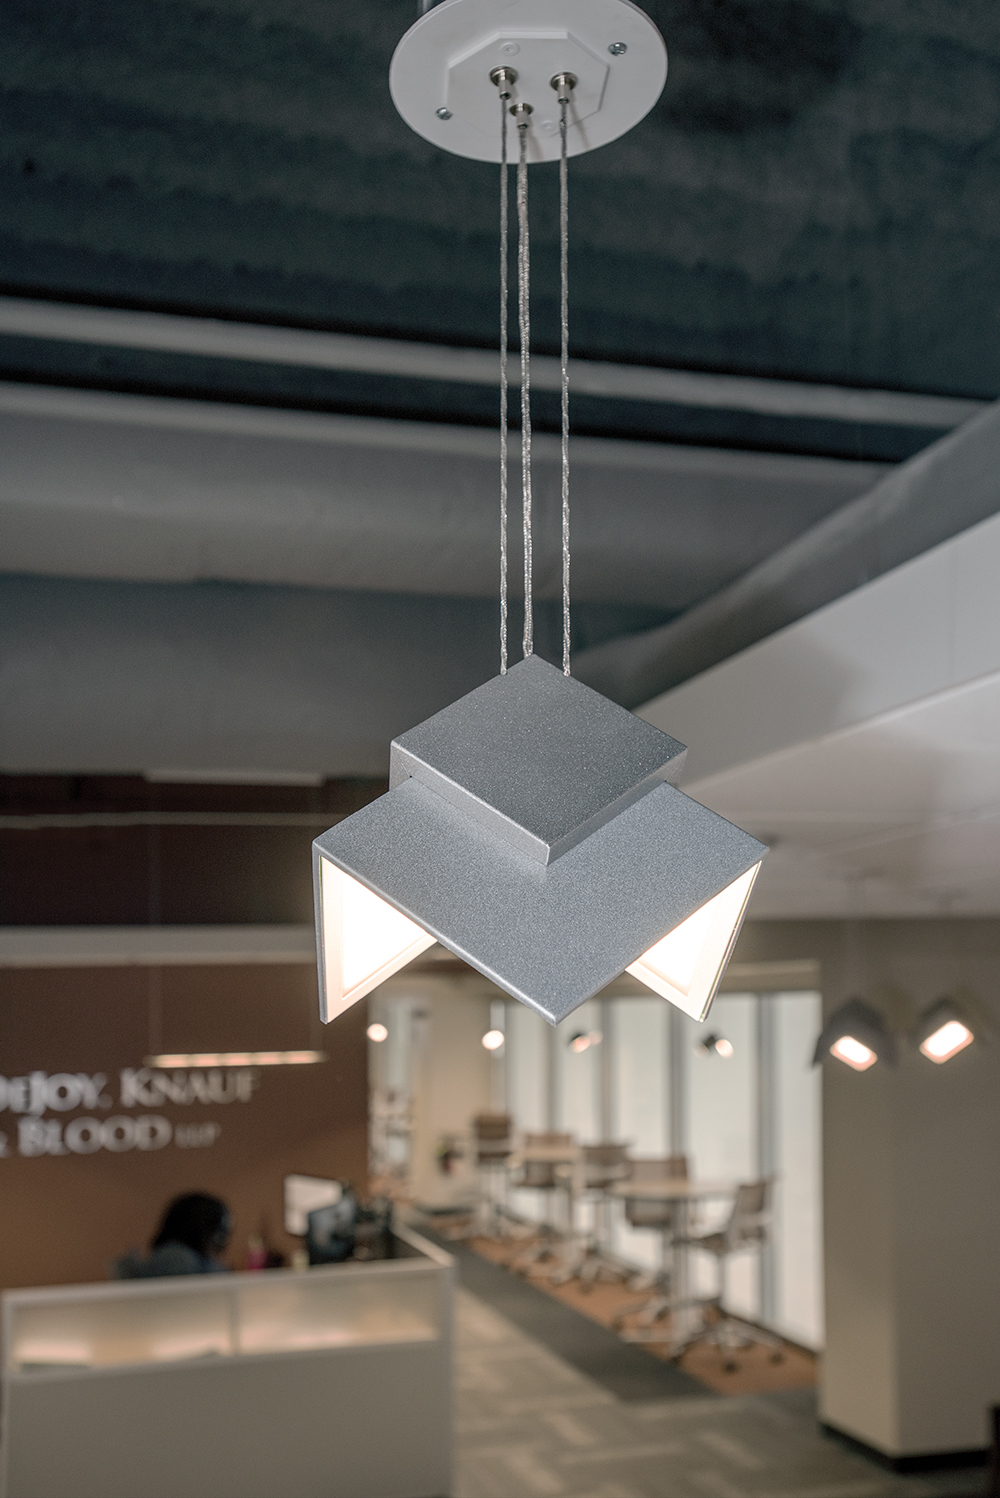 Petal OLED pendants are eye-catching office lighting fixtures, seen here above a workplace reception area.